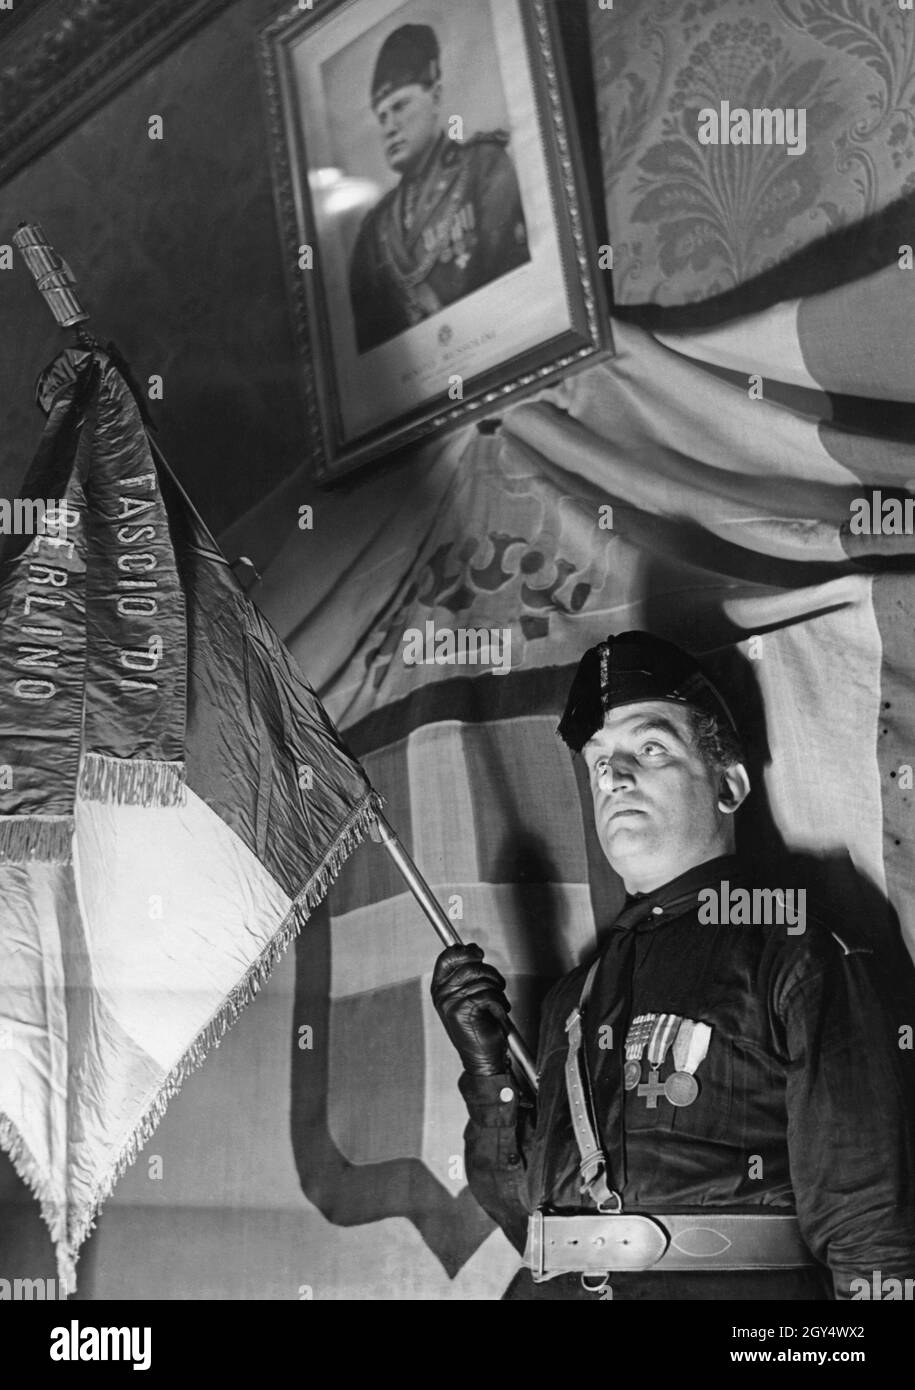 The Italian fascist group in Berlin (Fascio di Berlino) received a flag from Mussolini. The flag bearer is standing under a portrait of the dictator Benito Mussolini. The photograph was taken in 1933. [automated translation] Stock Photo